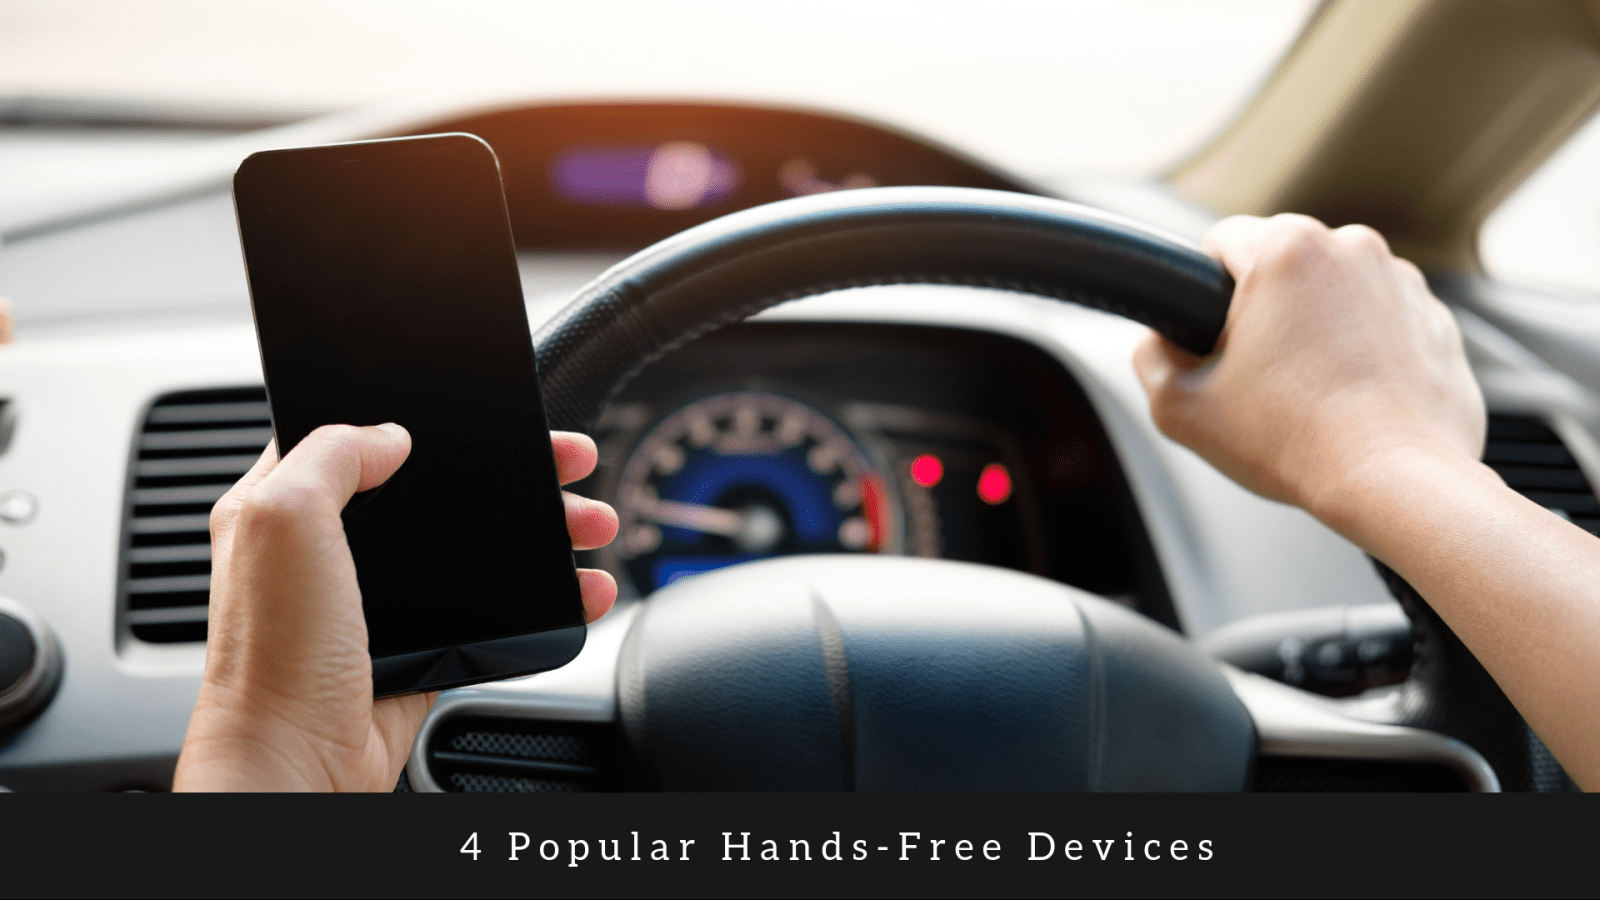 4 Popular Hands-Free Devices